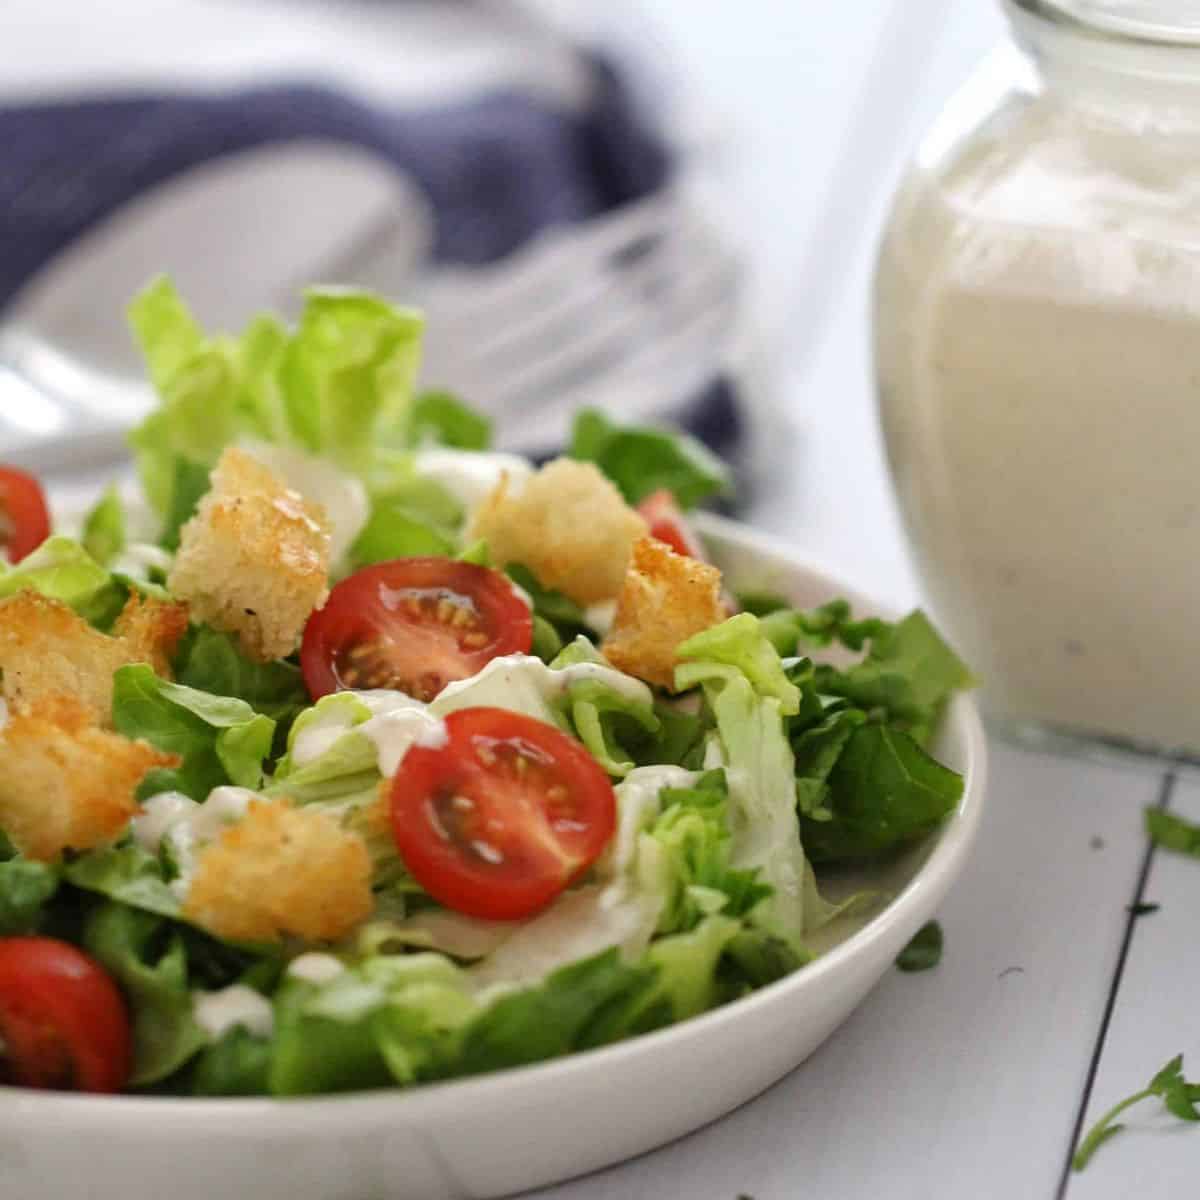 Rich and Creamy Thermomix Caesar Dressing